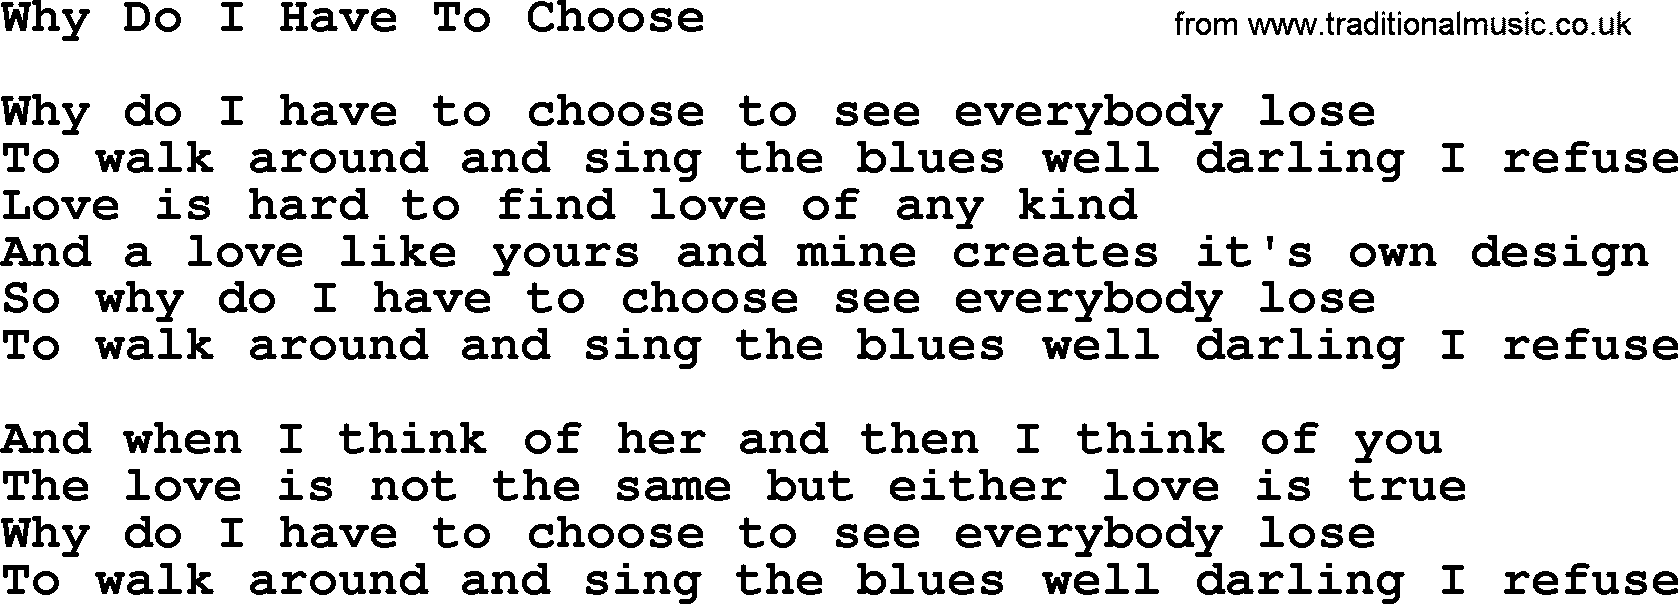 Willie Nelson song: Why Do I Have To Choose lyrics